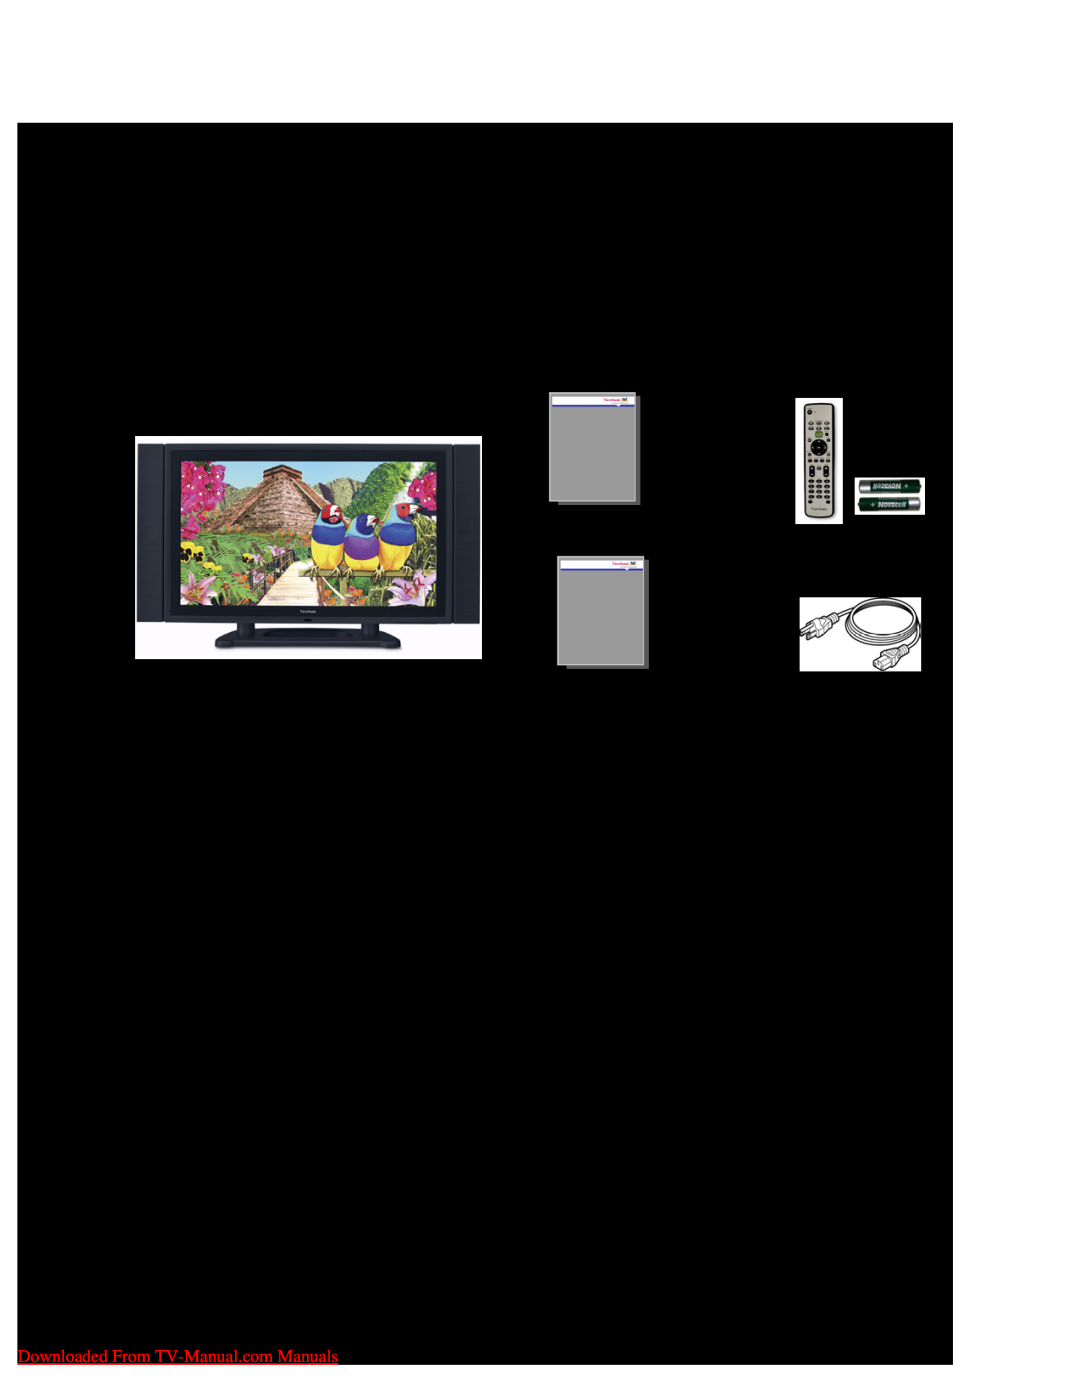 ViewSonic manual Introduction, Packaged Contents, Optional Accessory, Requirements, ND4210w Network Display 